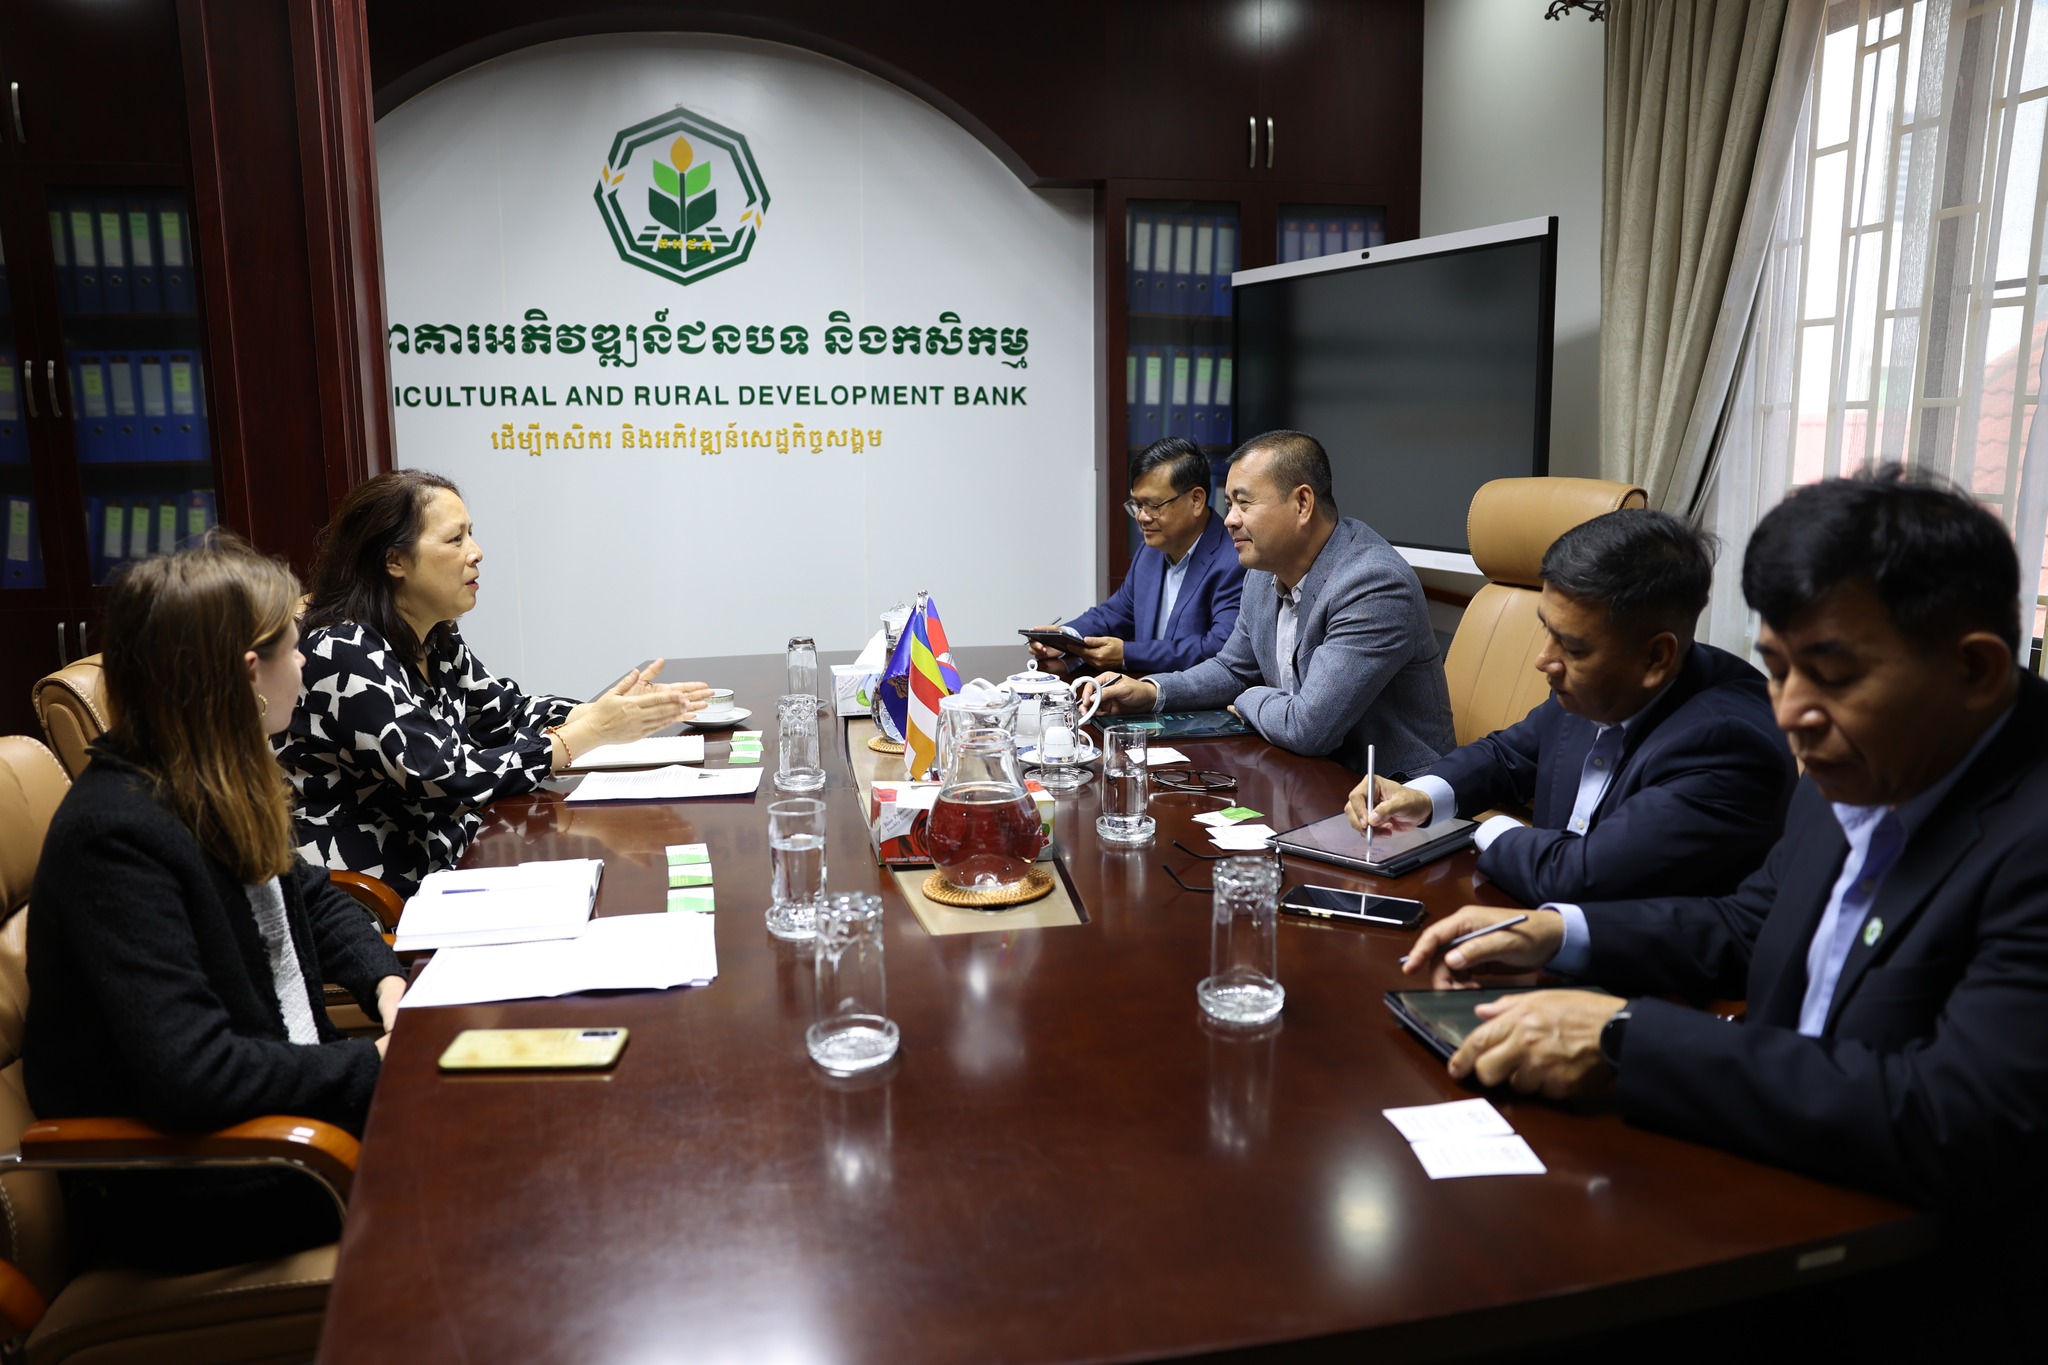 H.E Dr. KAO Thach, and colleagues have received a courtesy call from Ms. Sandrine BOUCHER, Country Director of the AFD